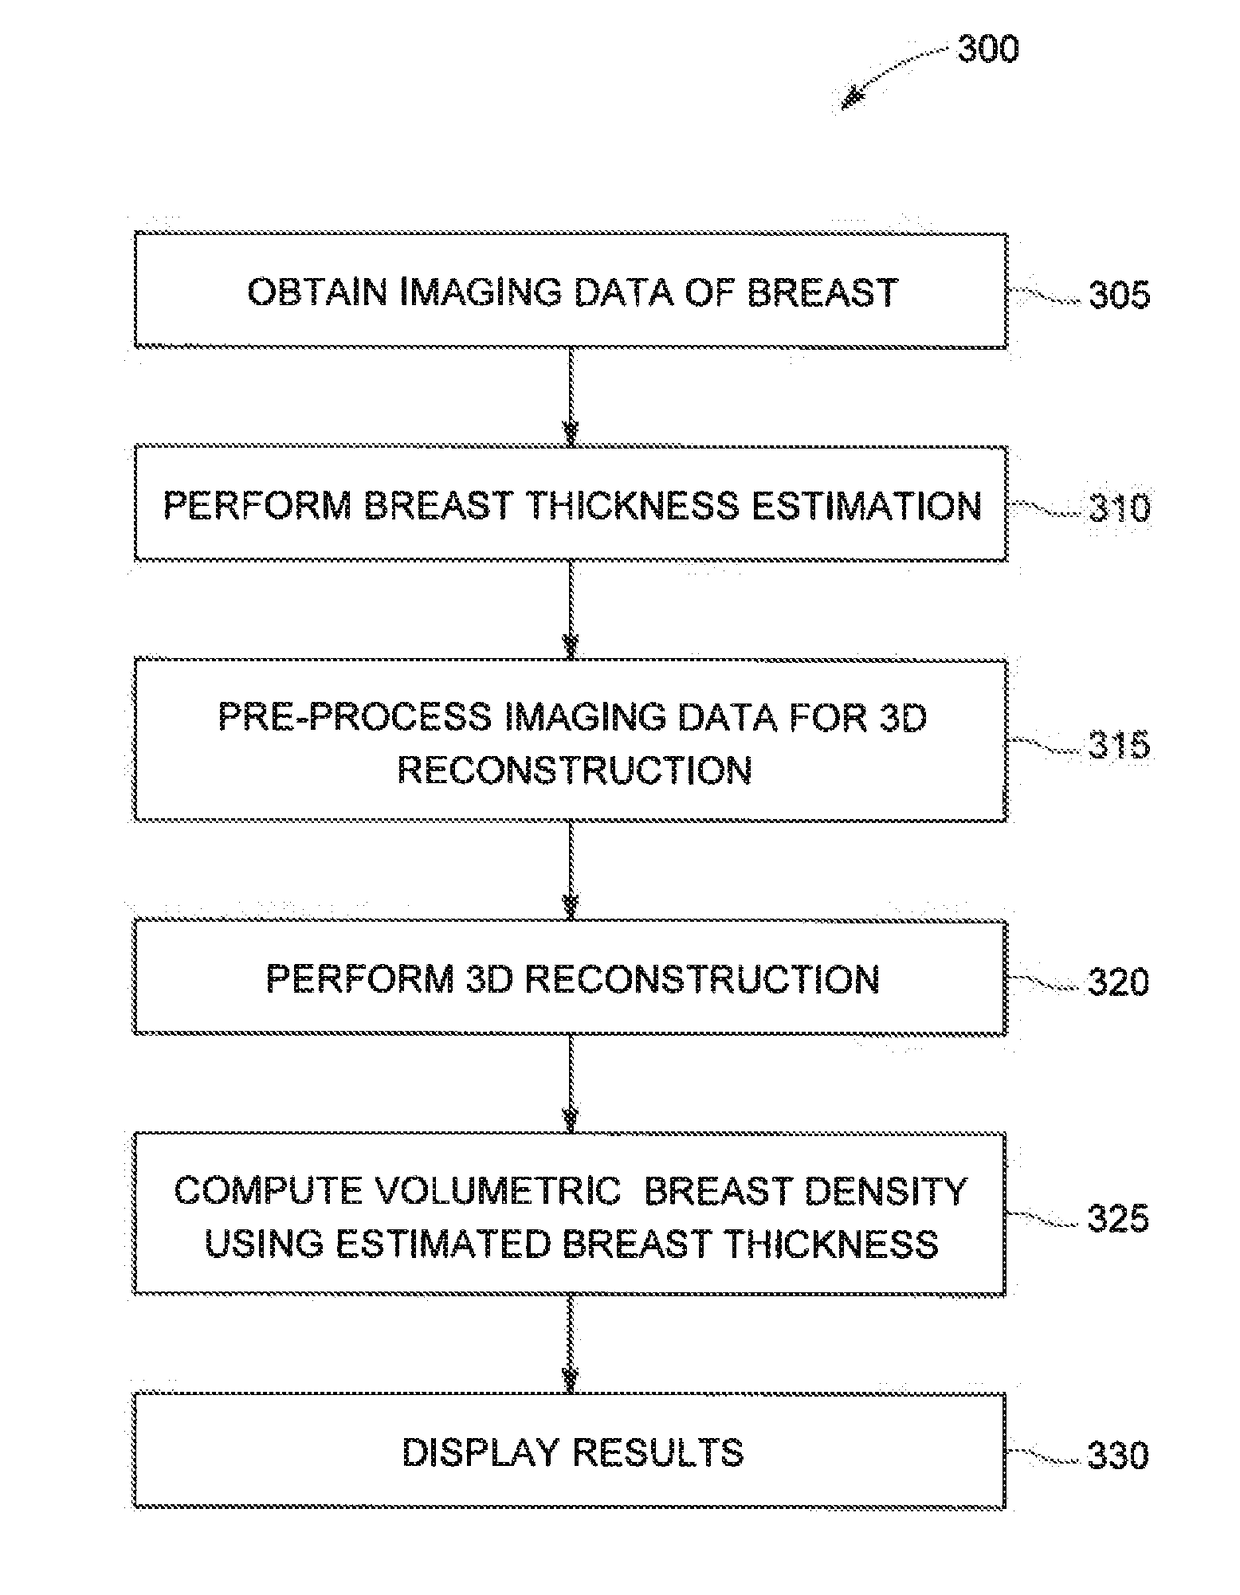 Breast tomosynthesis with flexible compression paddle